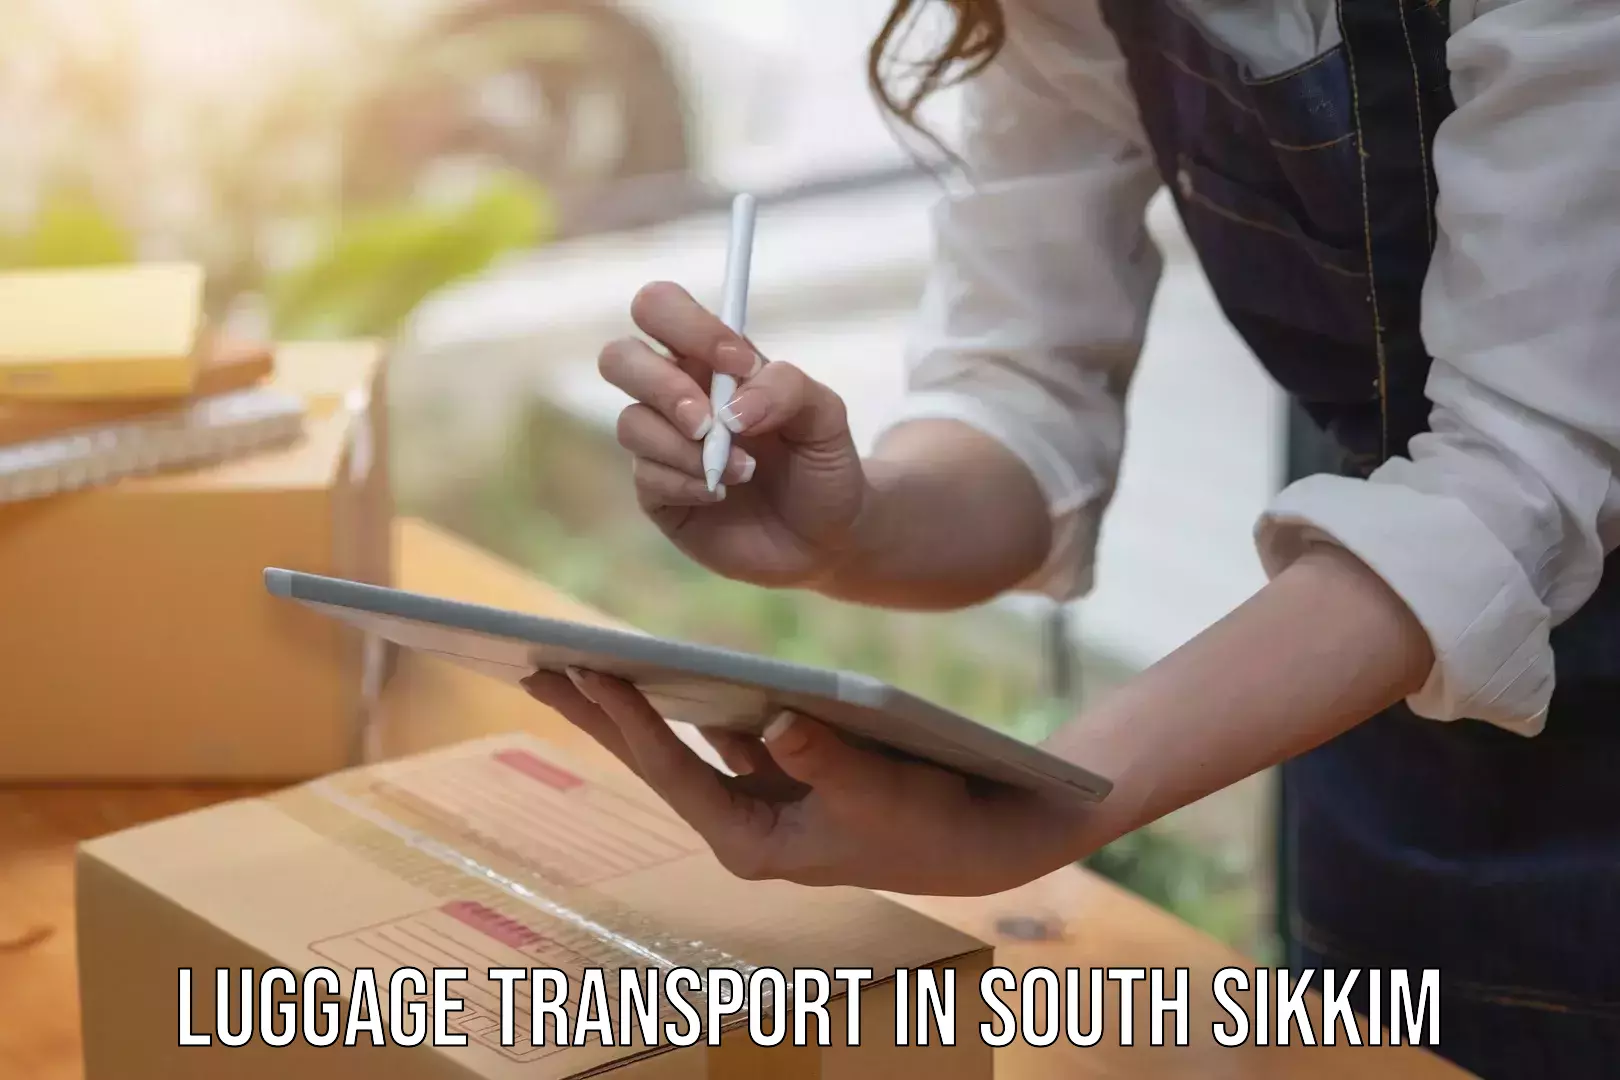 Luggage shipping consultation in South Sikkim